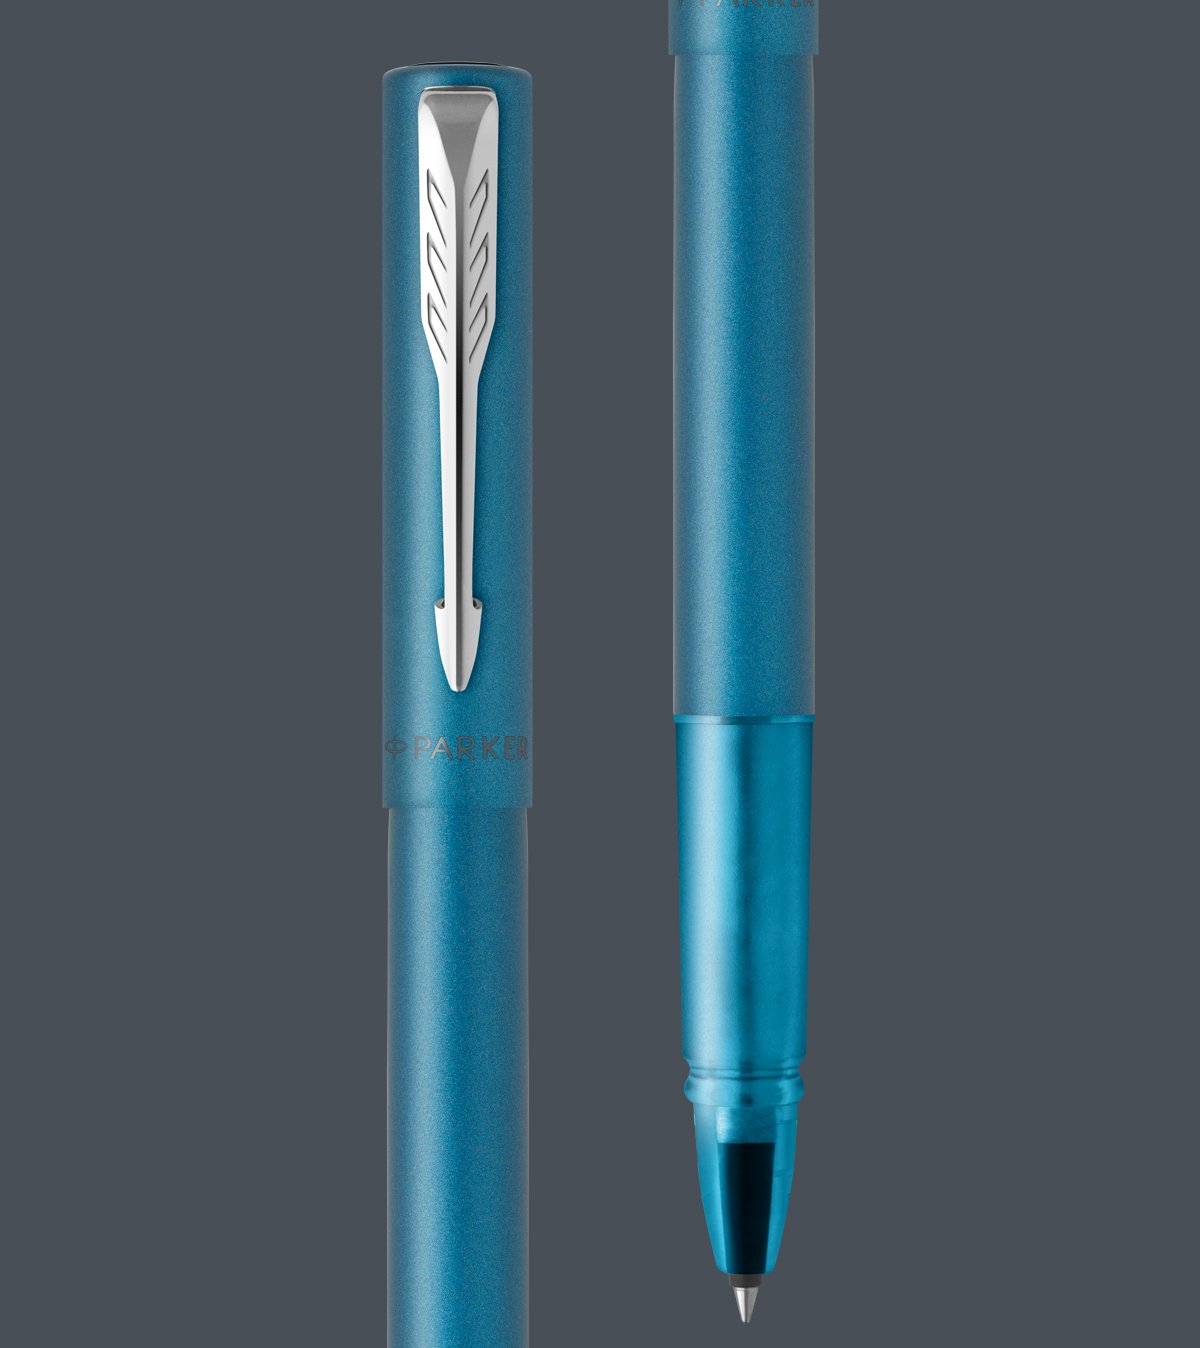 Two upright Vector rollerball pens.